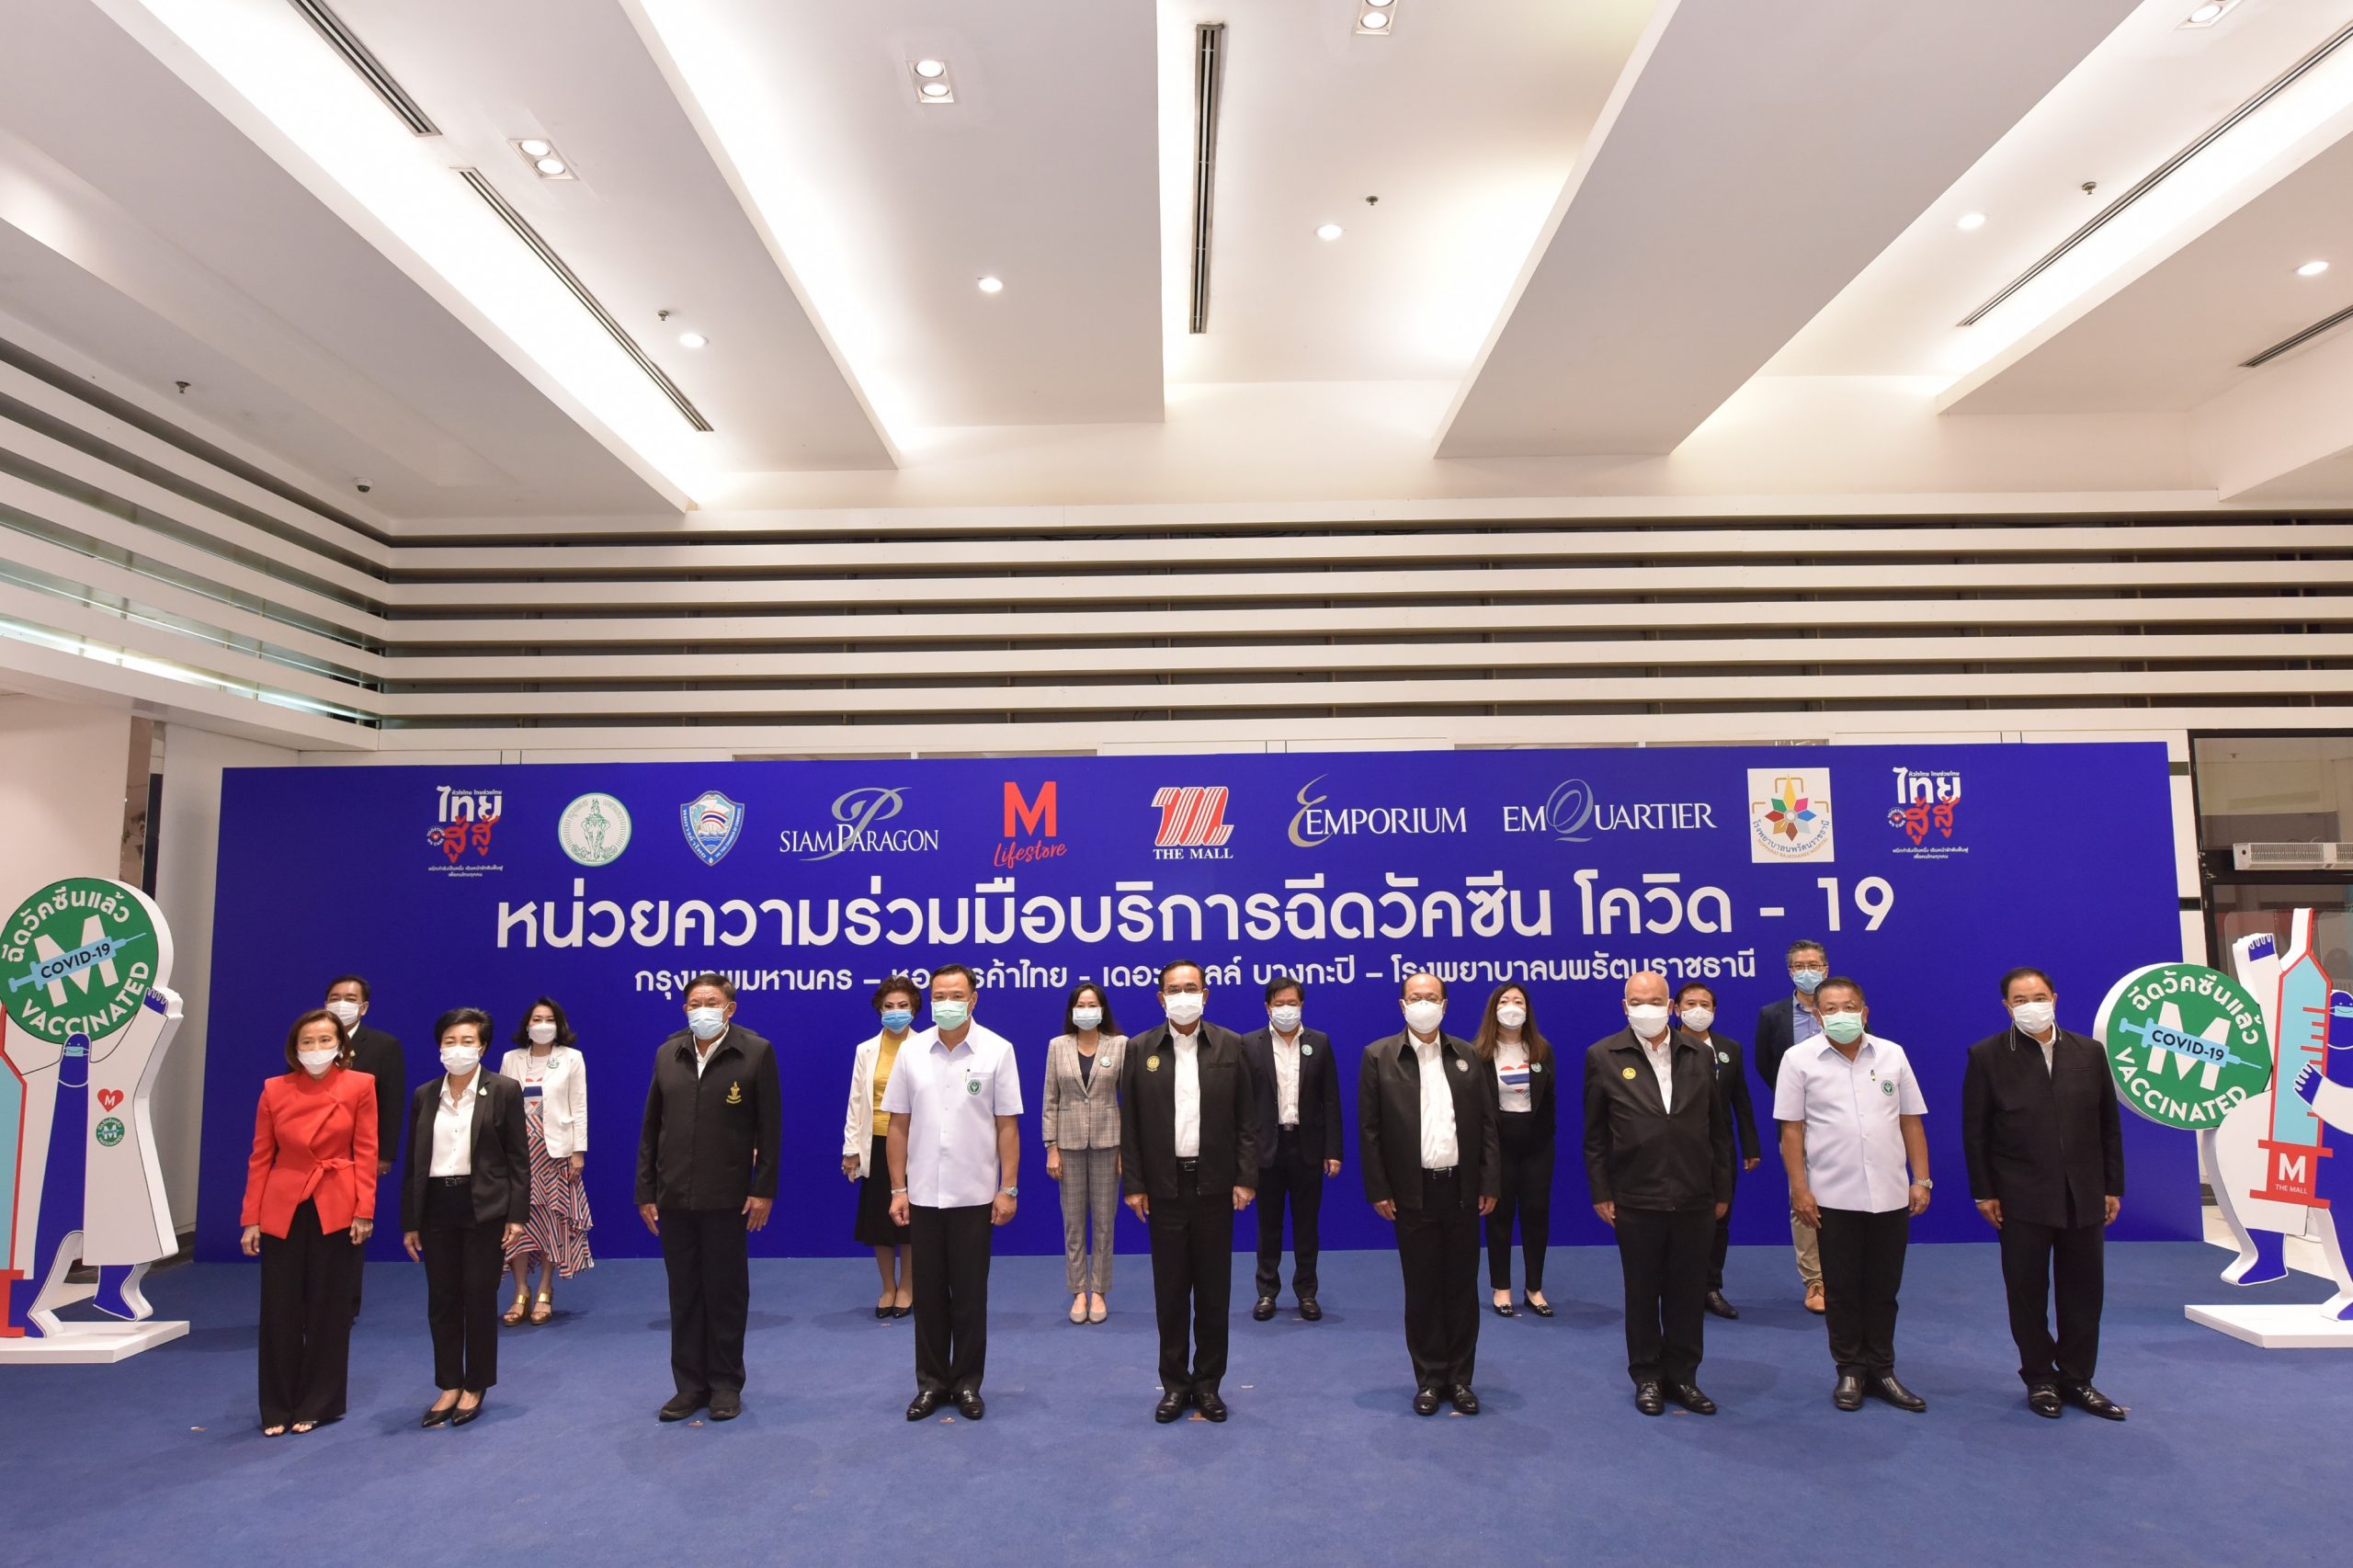 Prayut Attends Inspection Visit at The Mall Bangkapi COVID-19 Vaccination Site